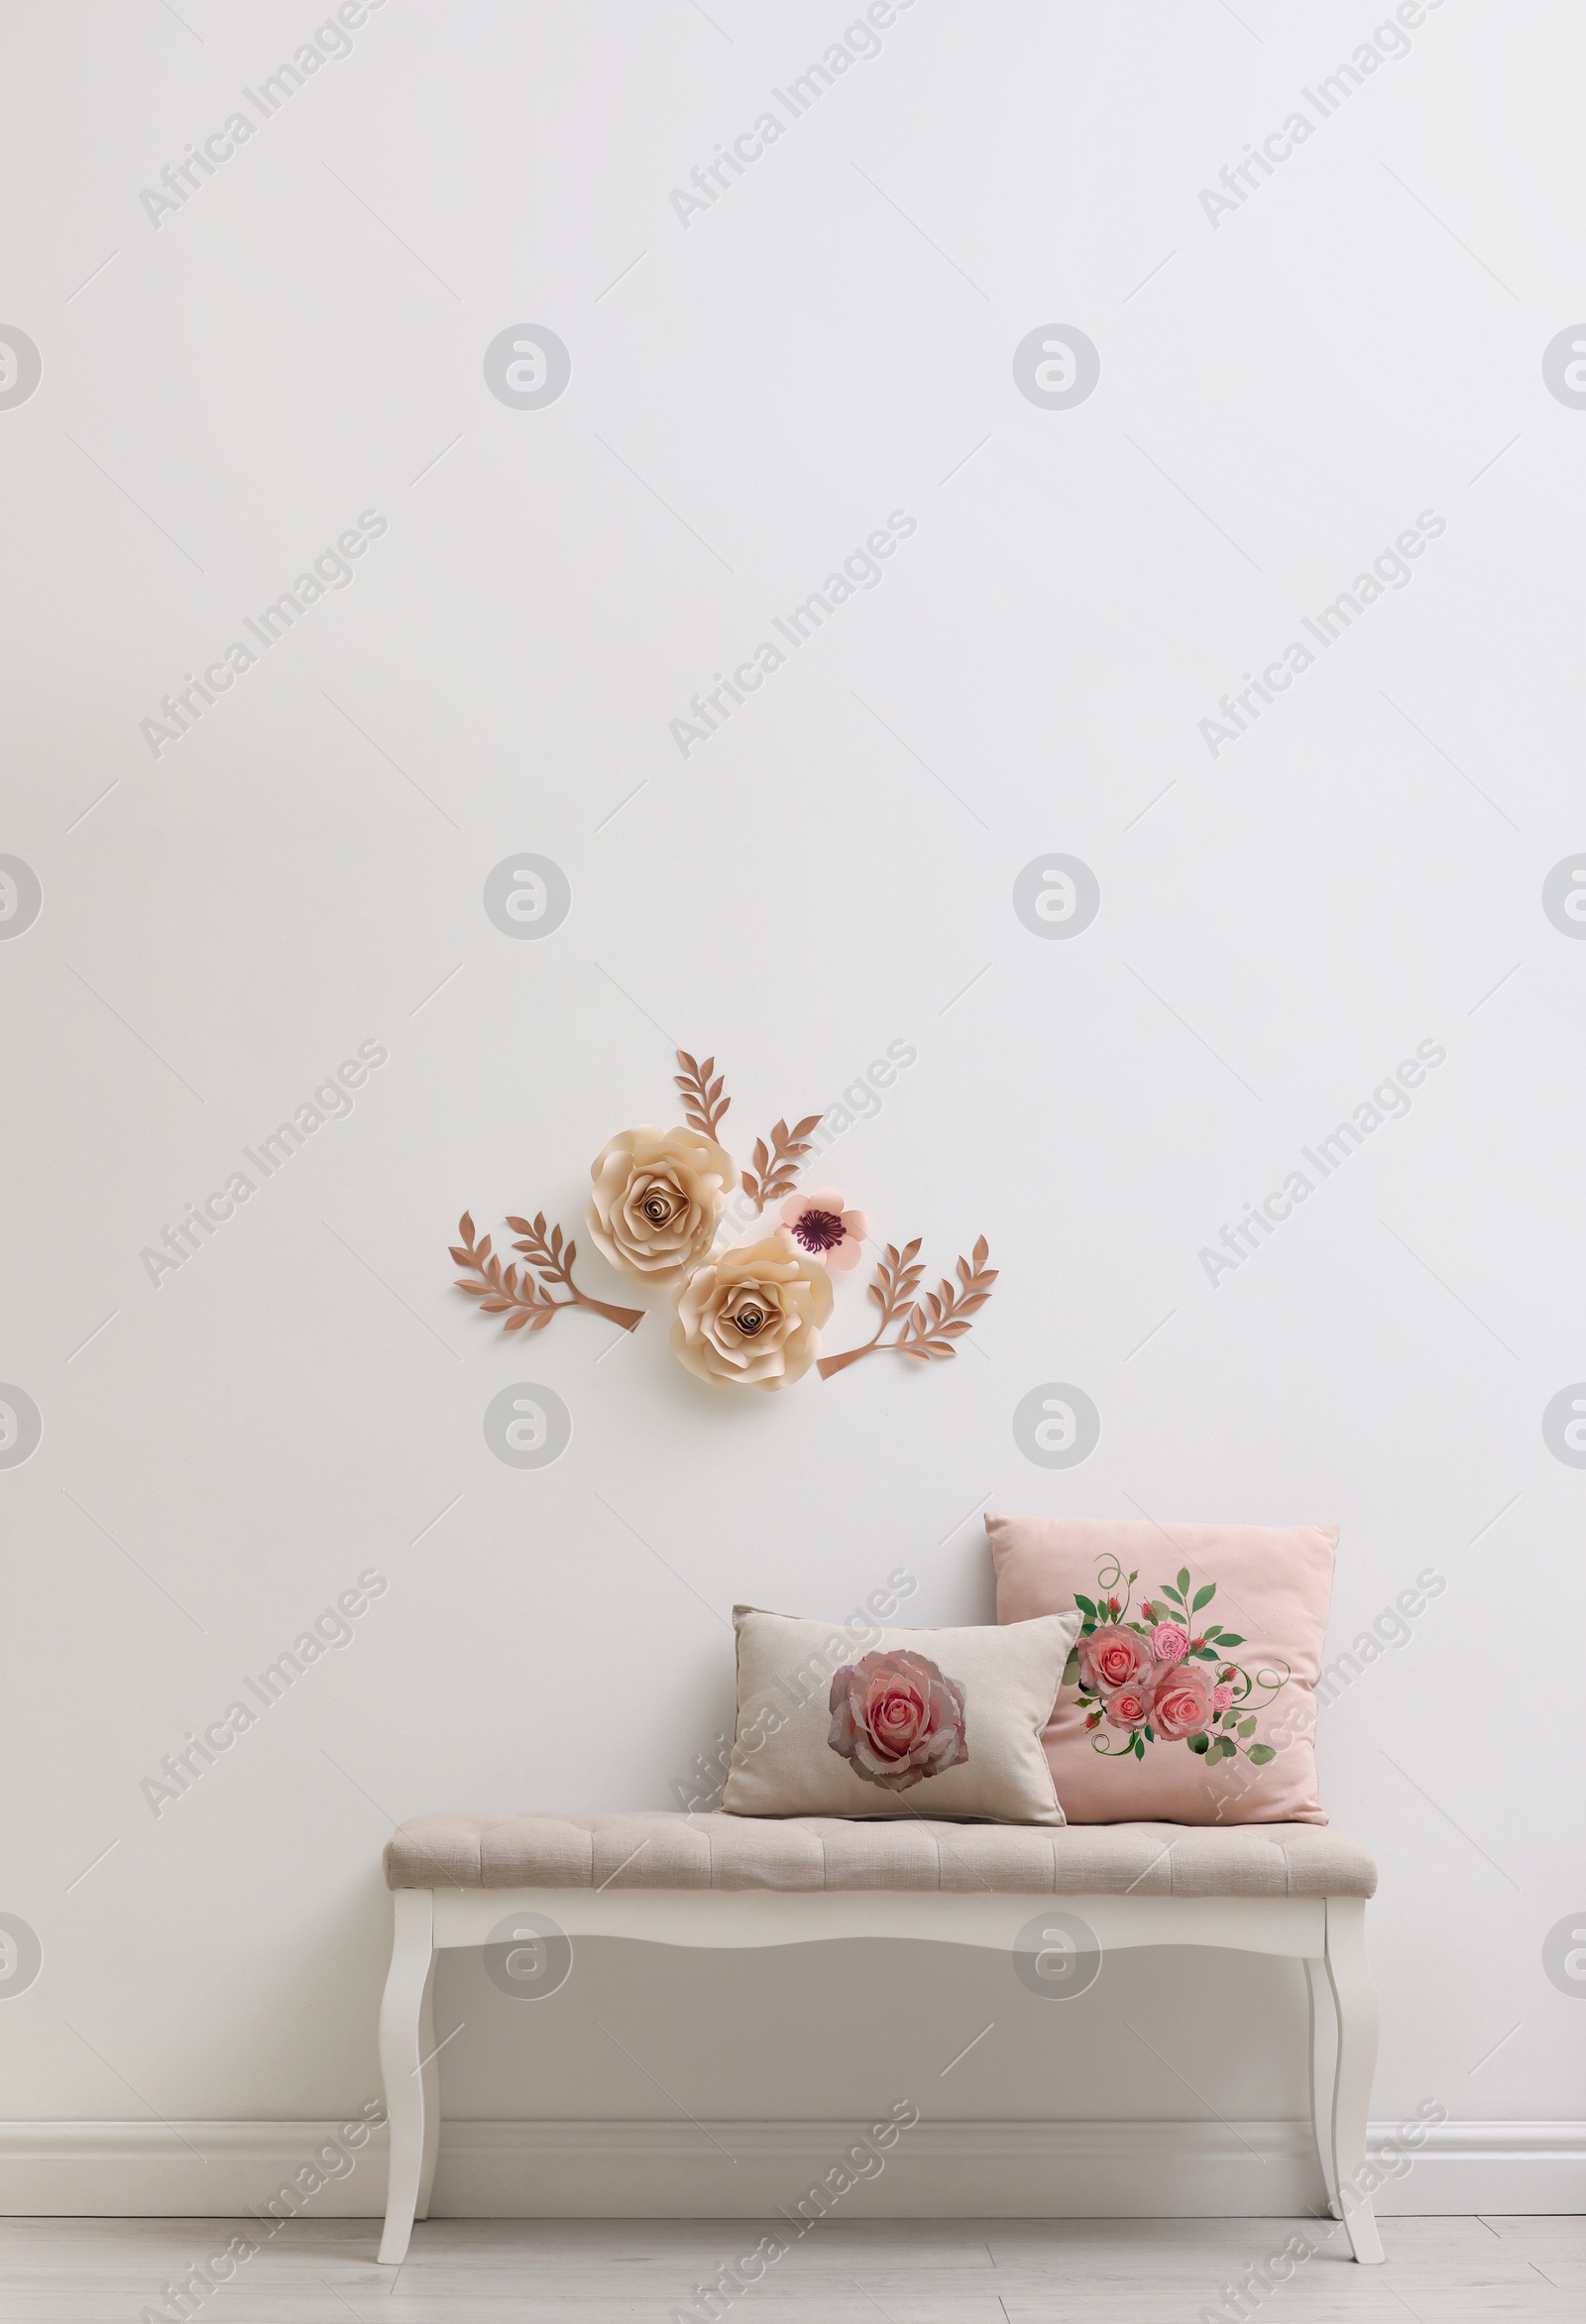 Image of Soft pillows with printed roses on bench indoors